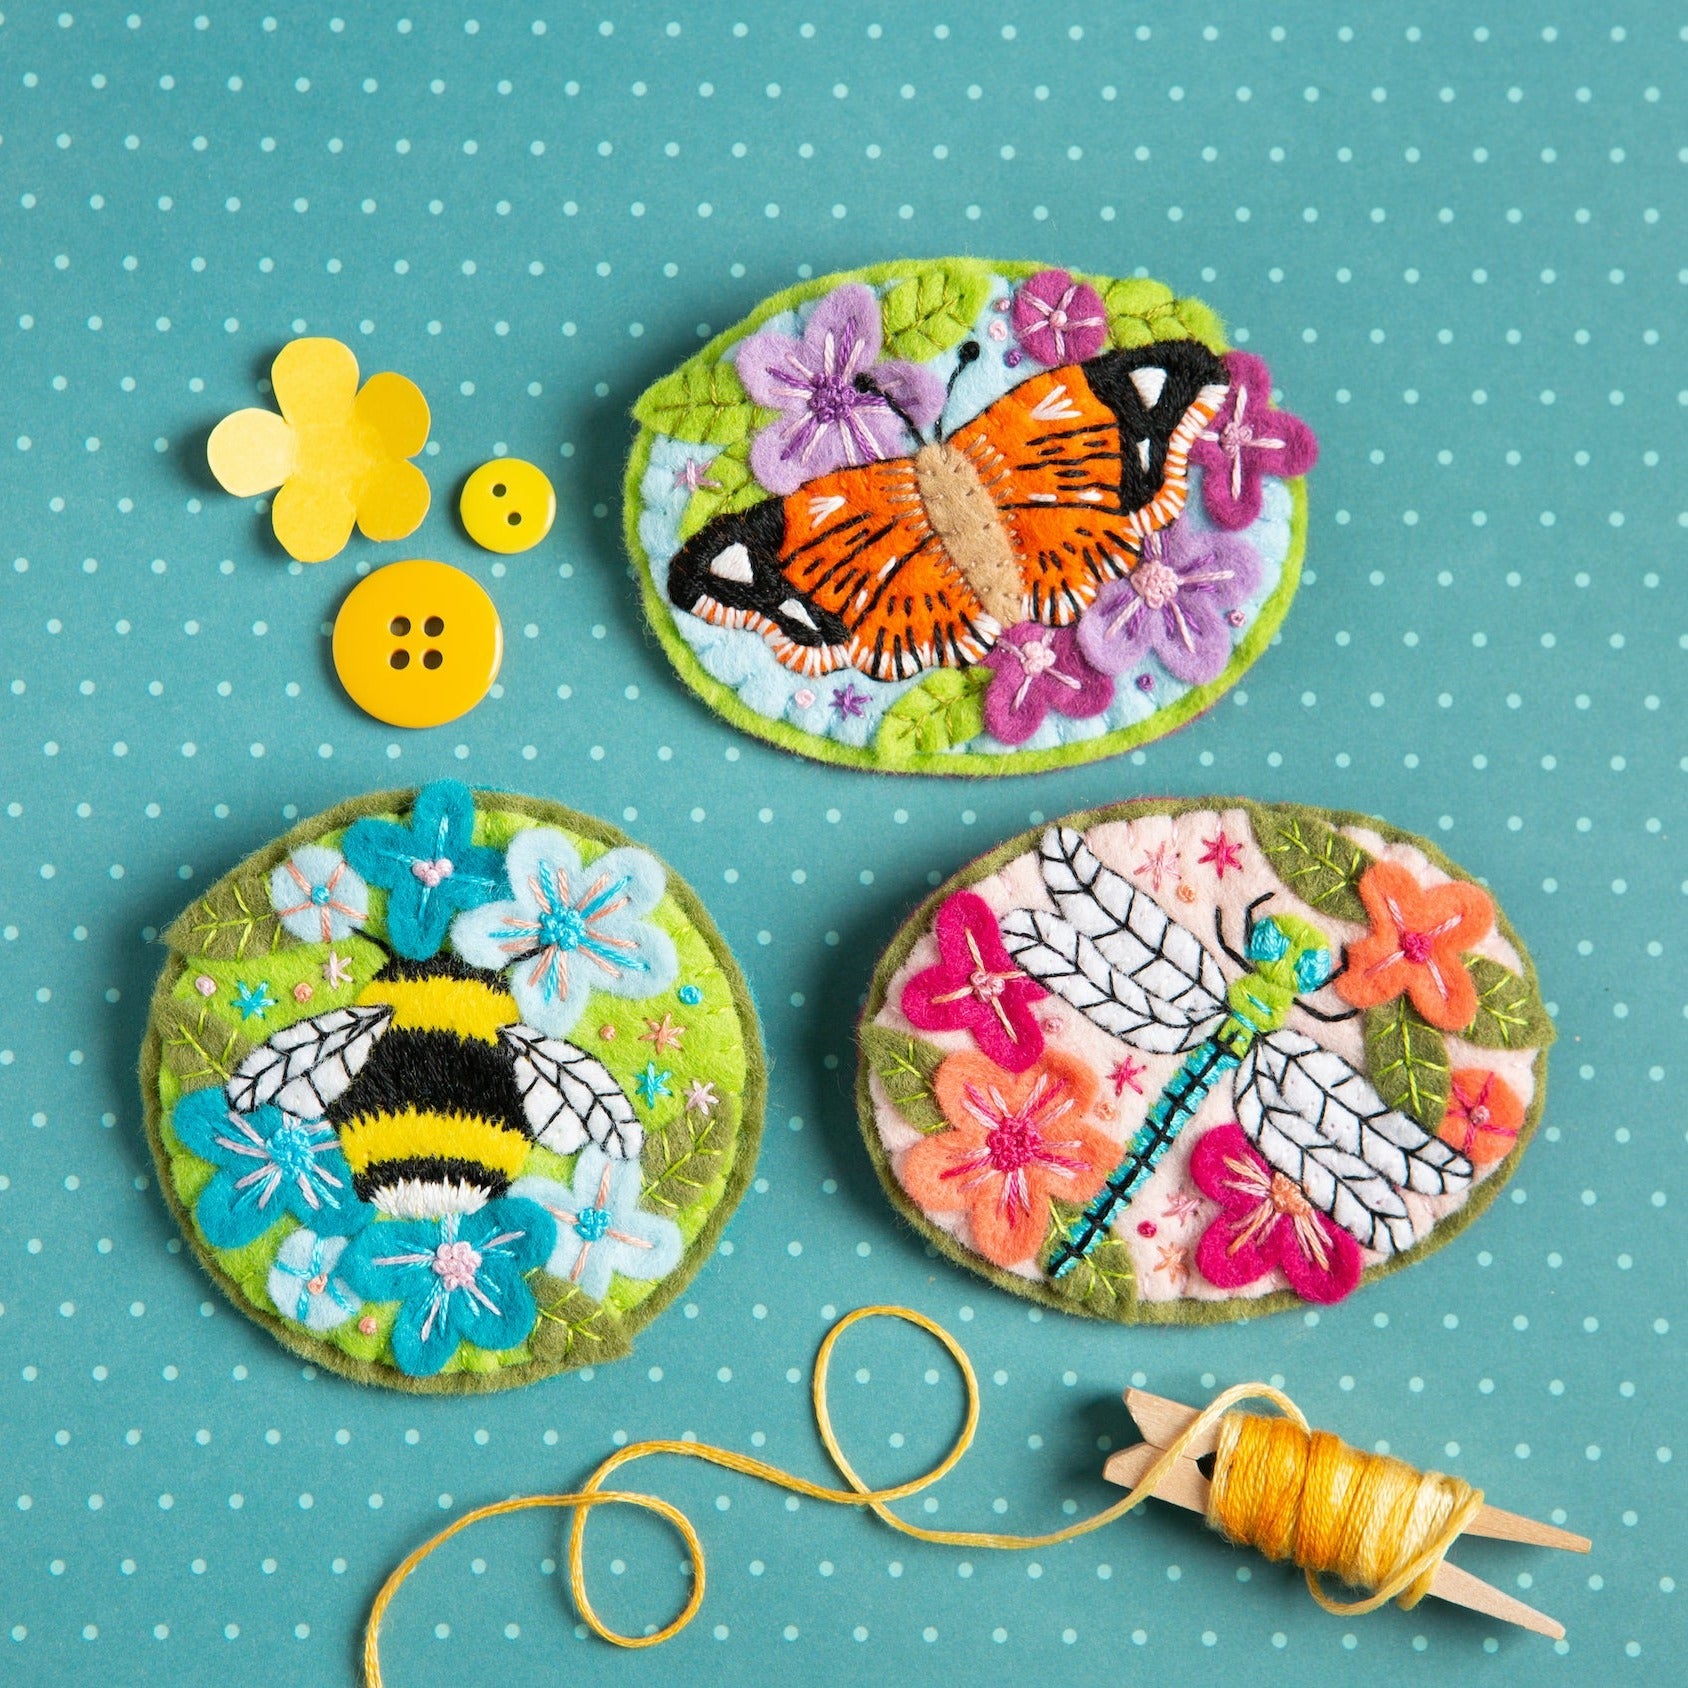 DIY Small Embroidery Hoop Bumble Bee - The Crafty Decorator